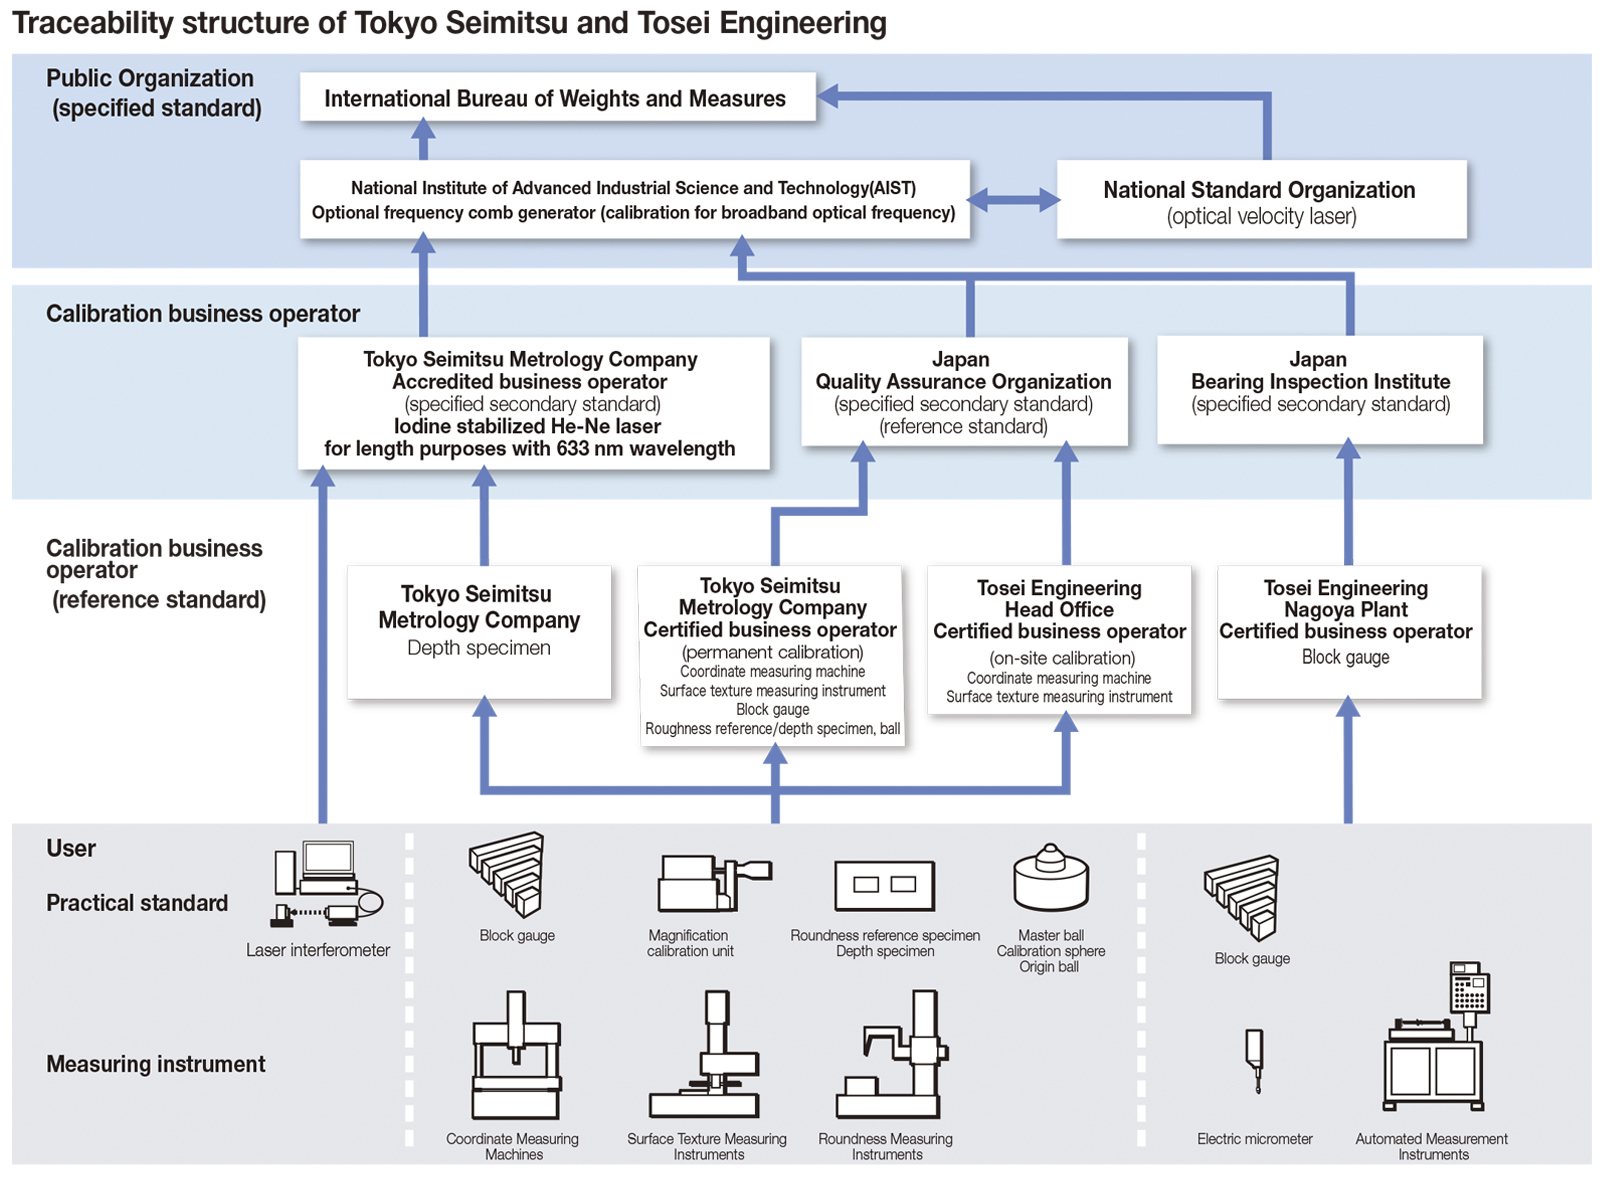 Traceability at Tosei Engineering